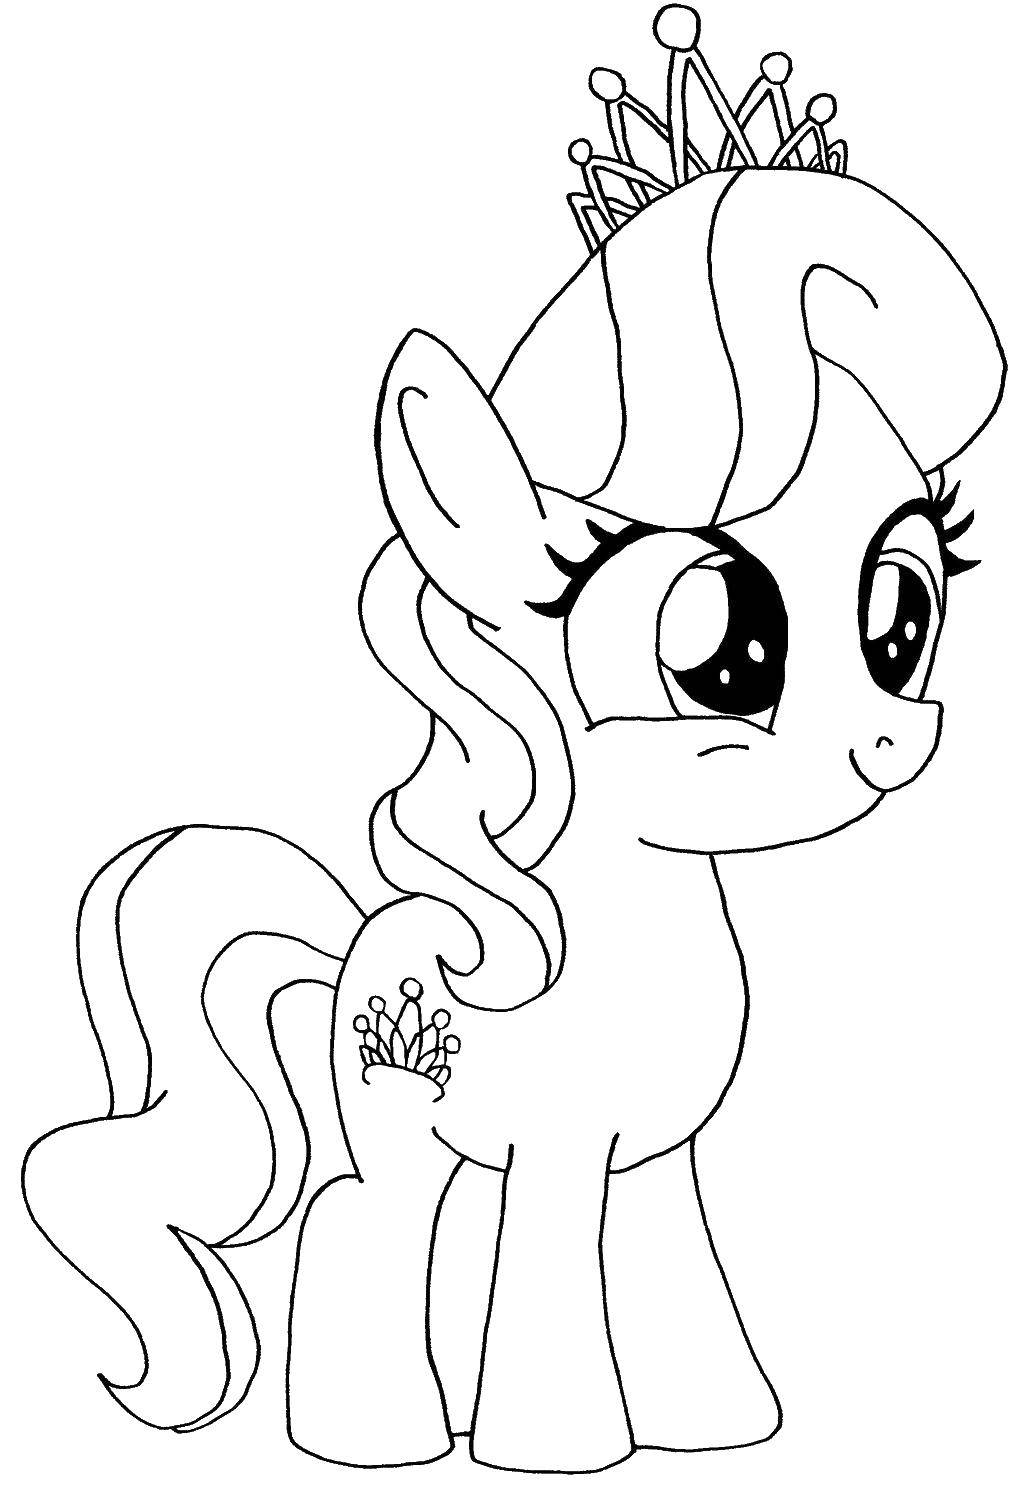 Coloring Ponies from my little pony . Category my little pony. Tags:  Pony, My little pony .